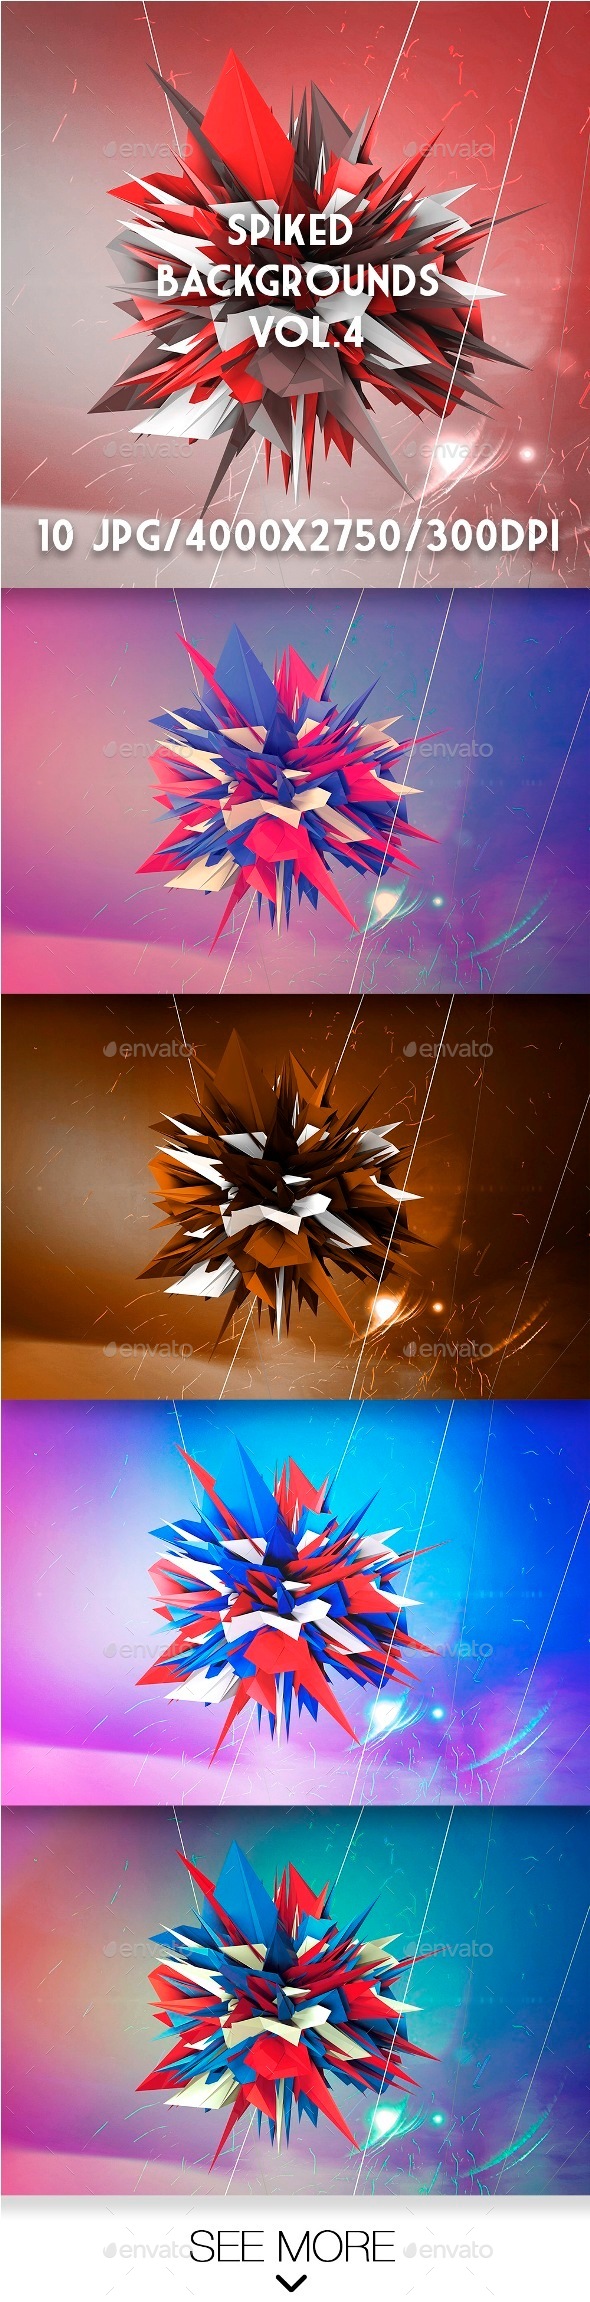 Spiked Backgrounds Vol.4